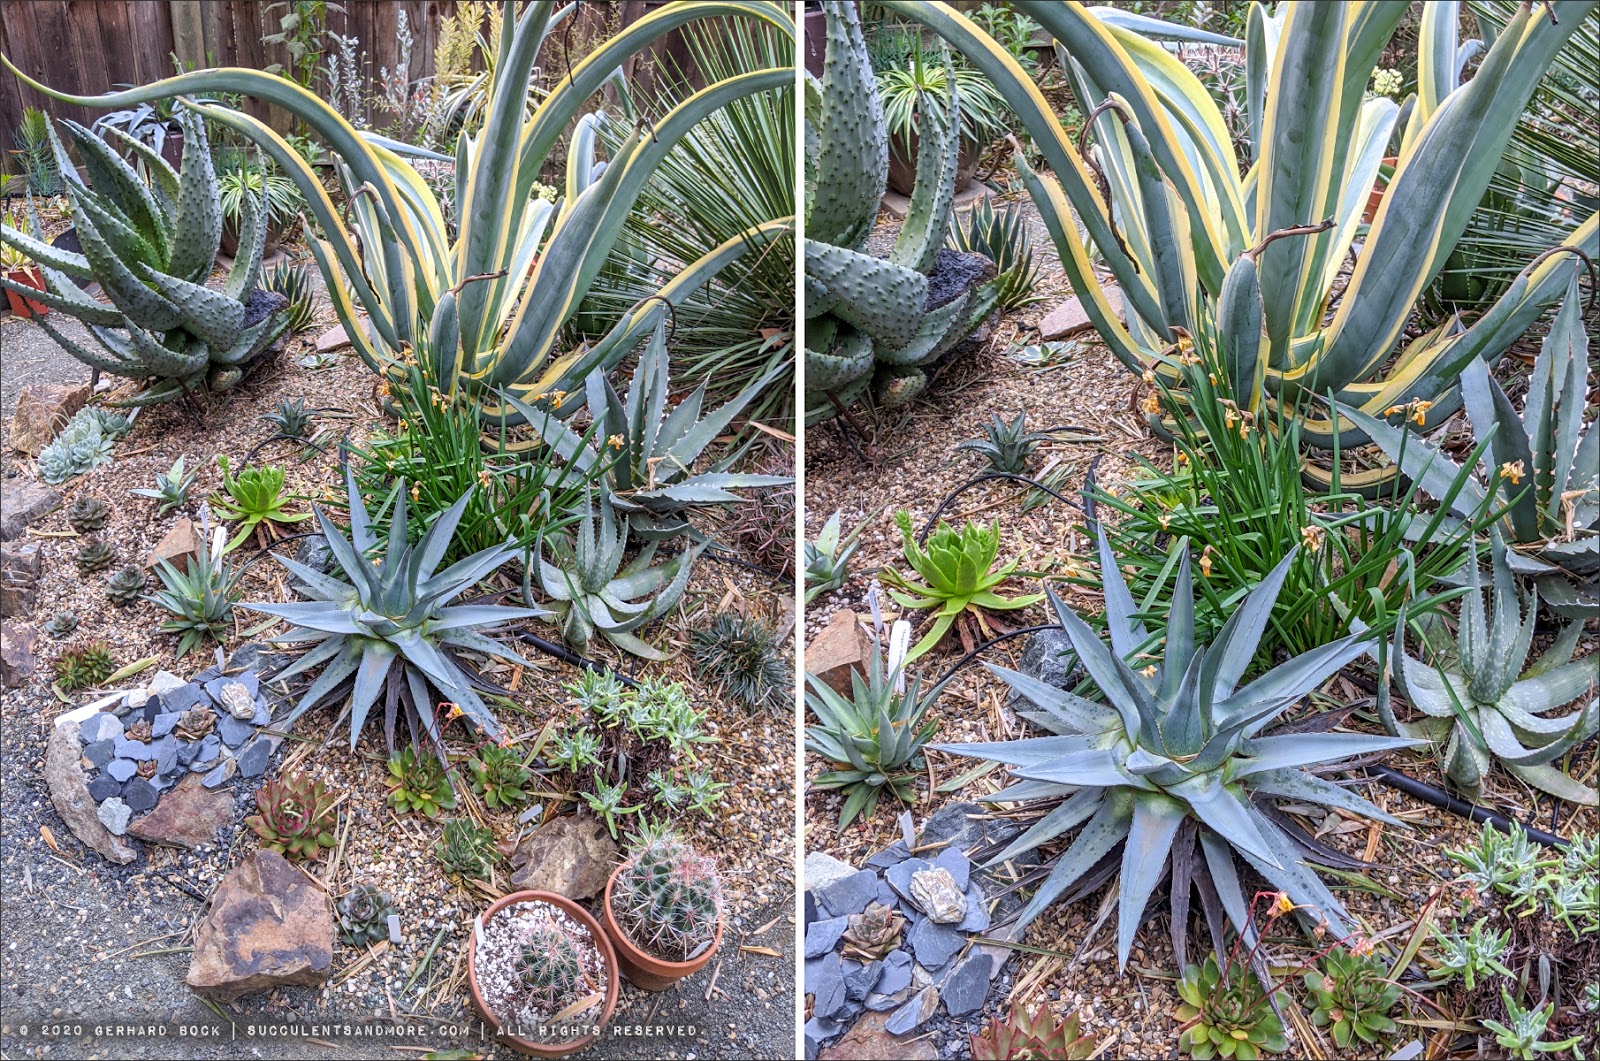 More agave/aloe musical chairs in our garden